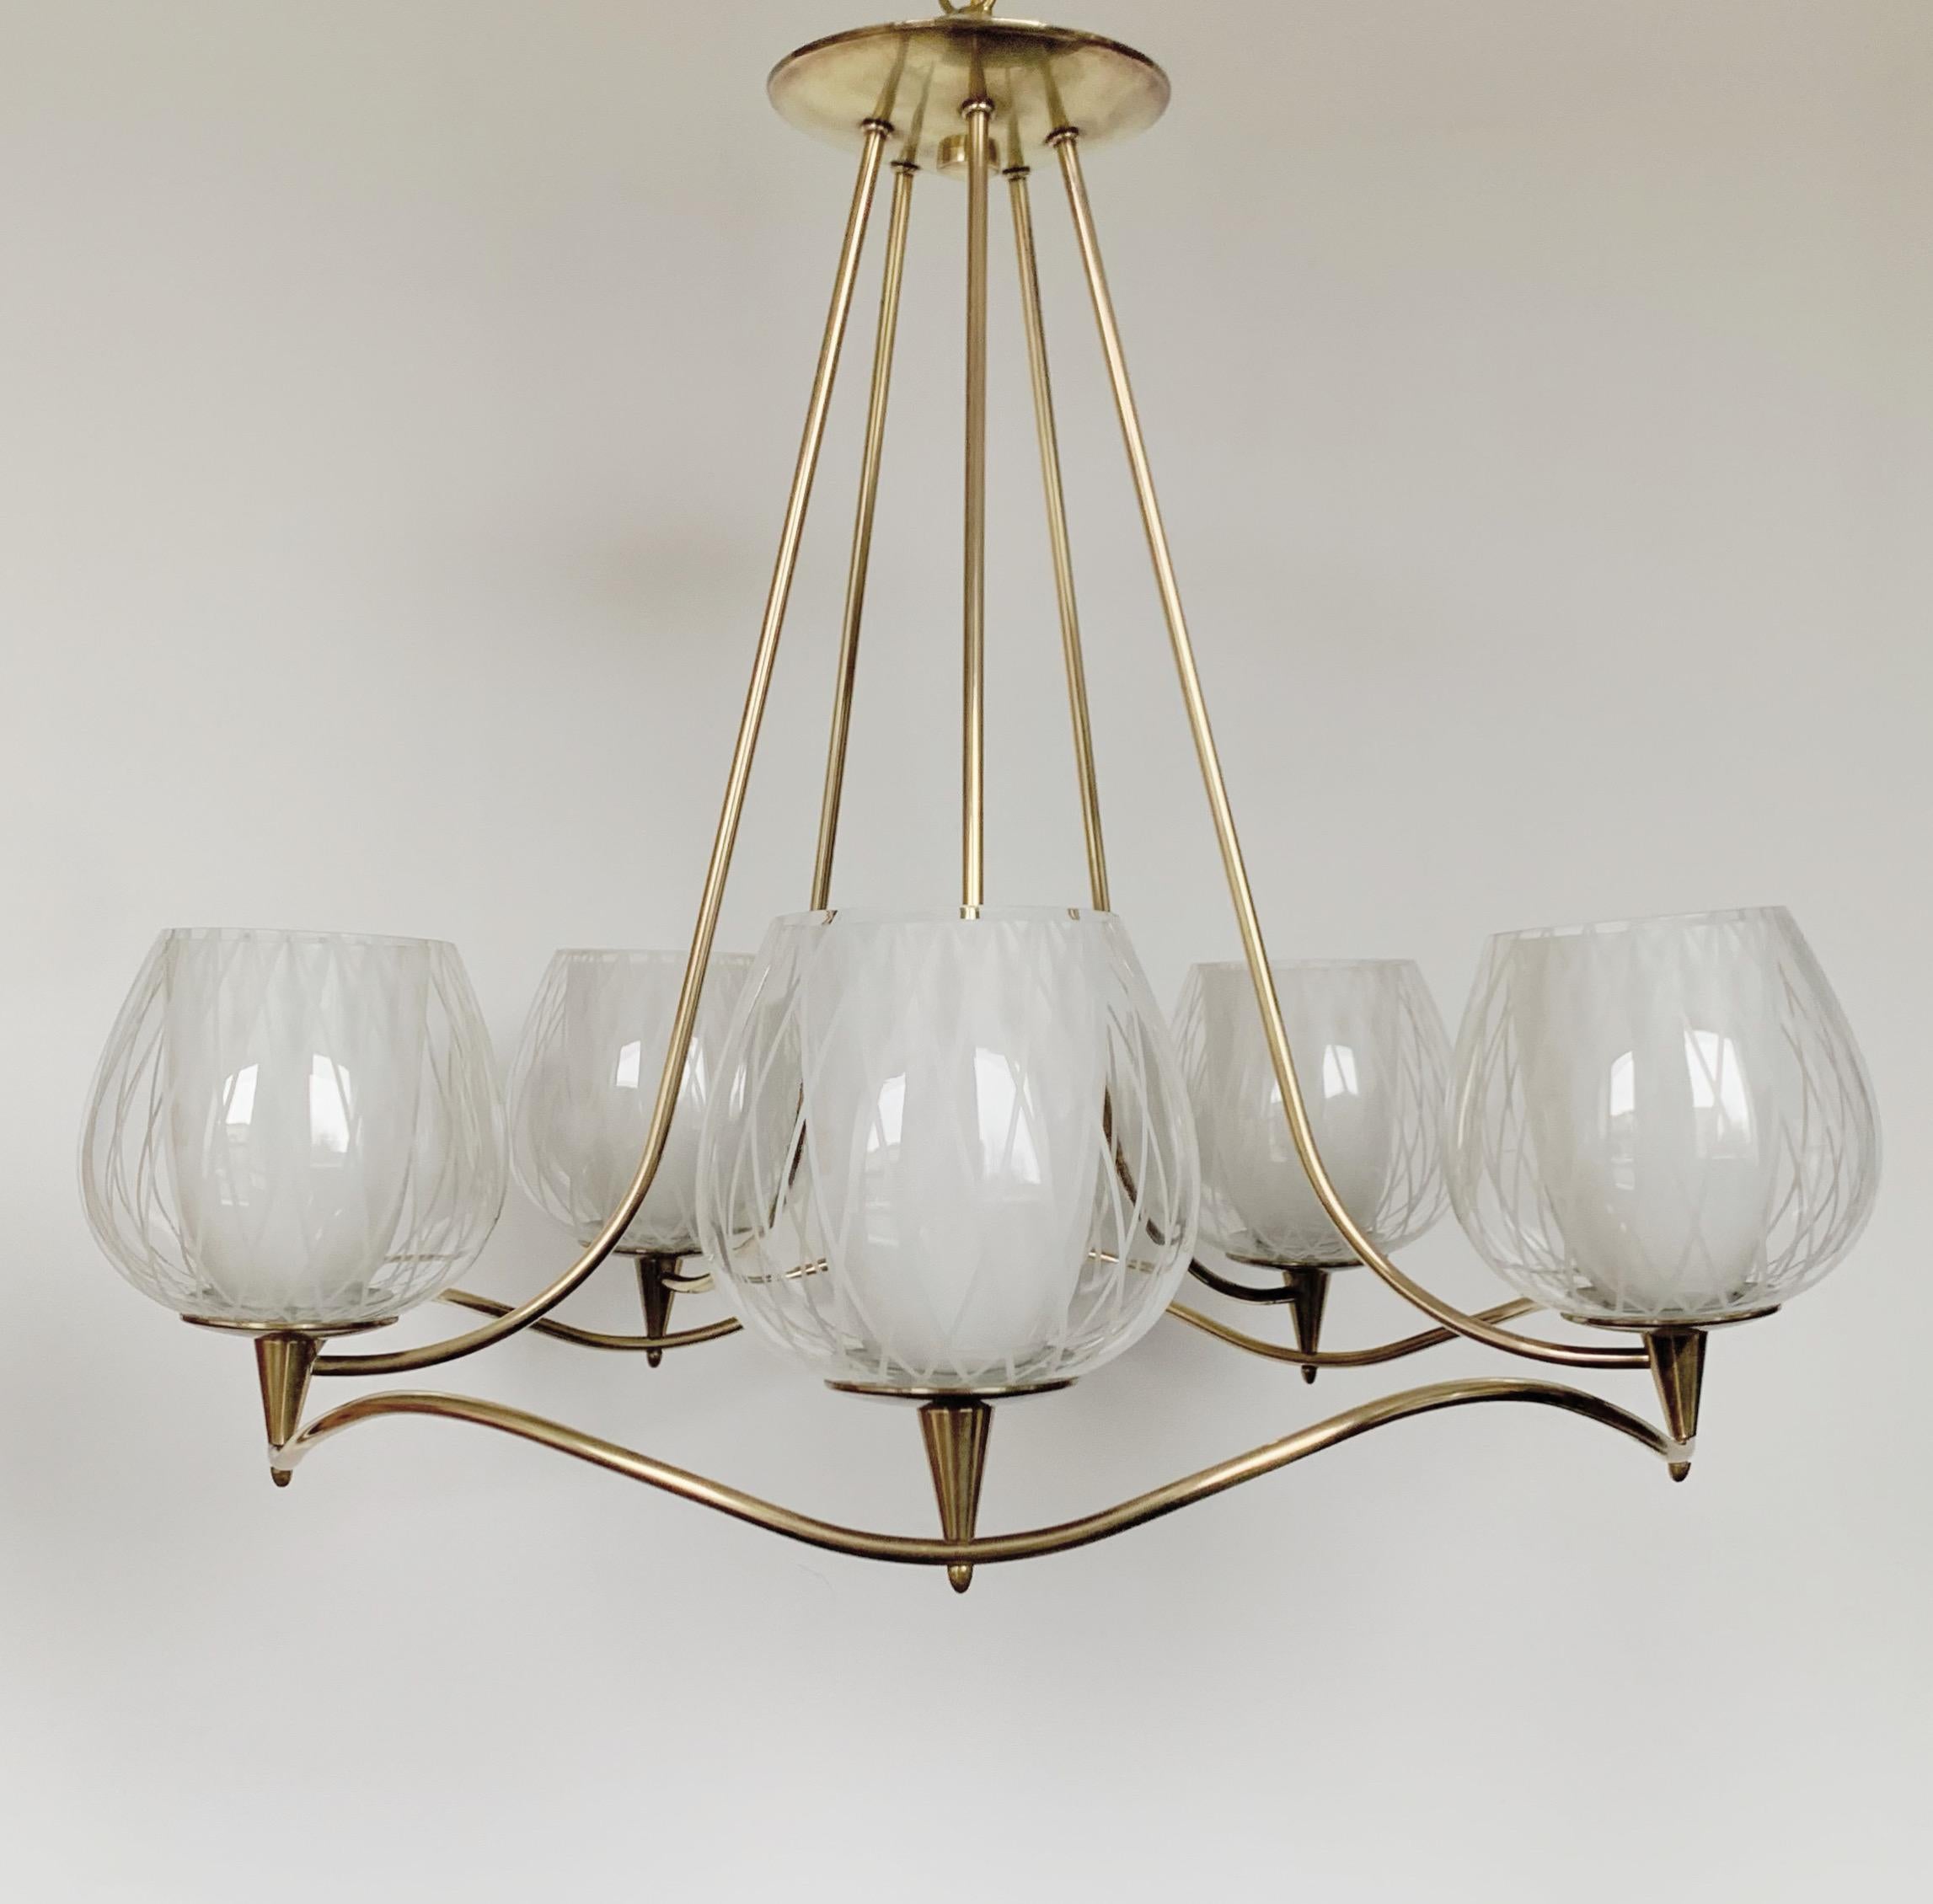 Lightolier 5-Arm Chandelier 1950s In Good Condition For Sale In Pittsburgh, PA